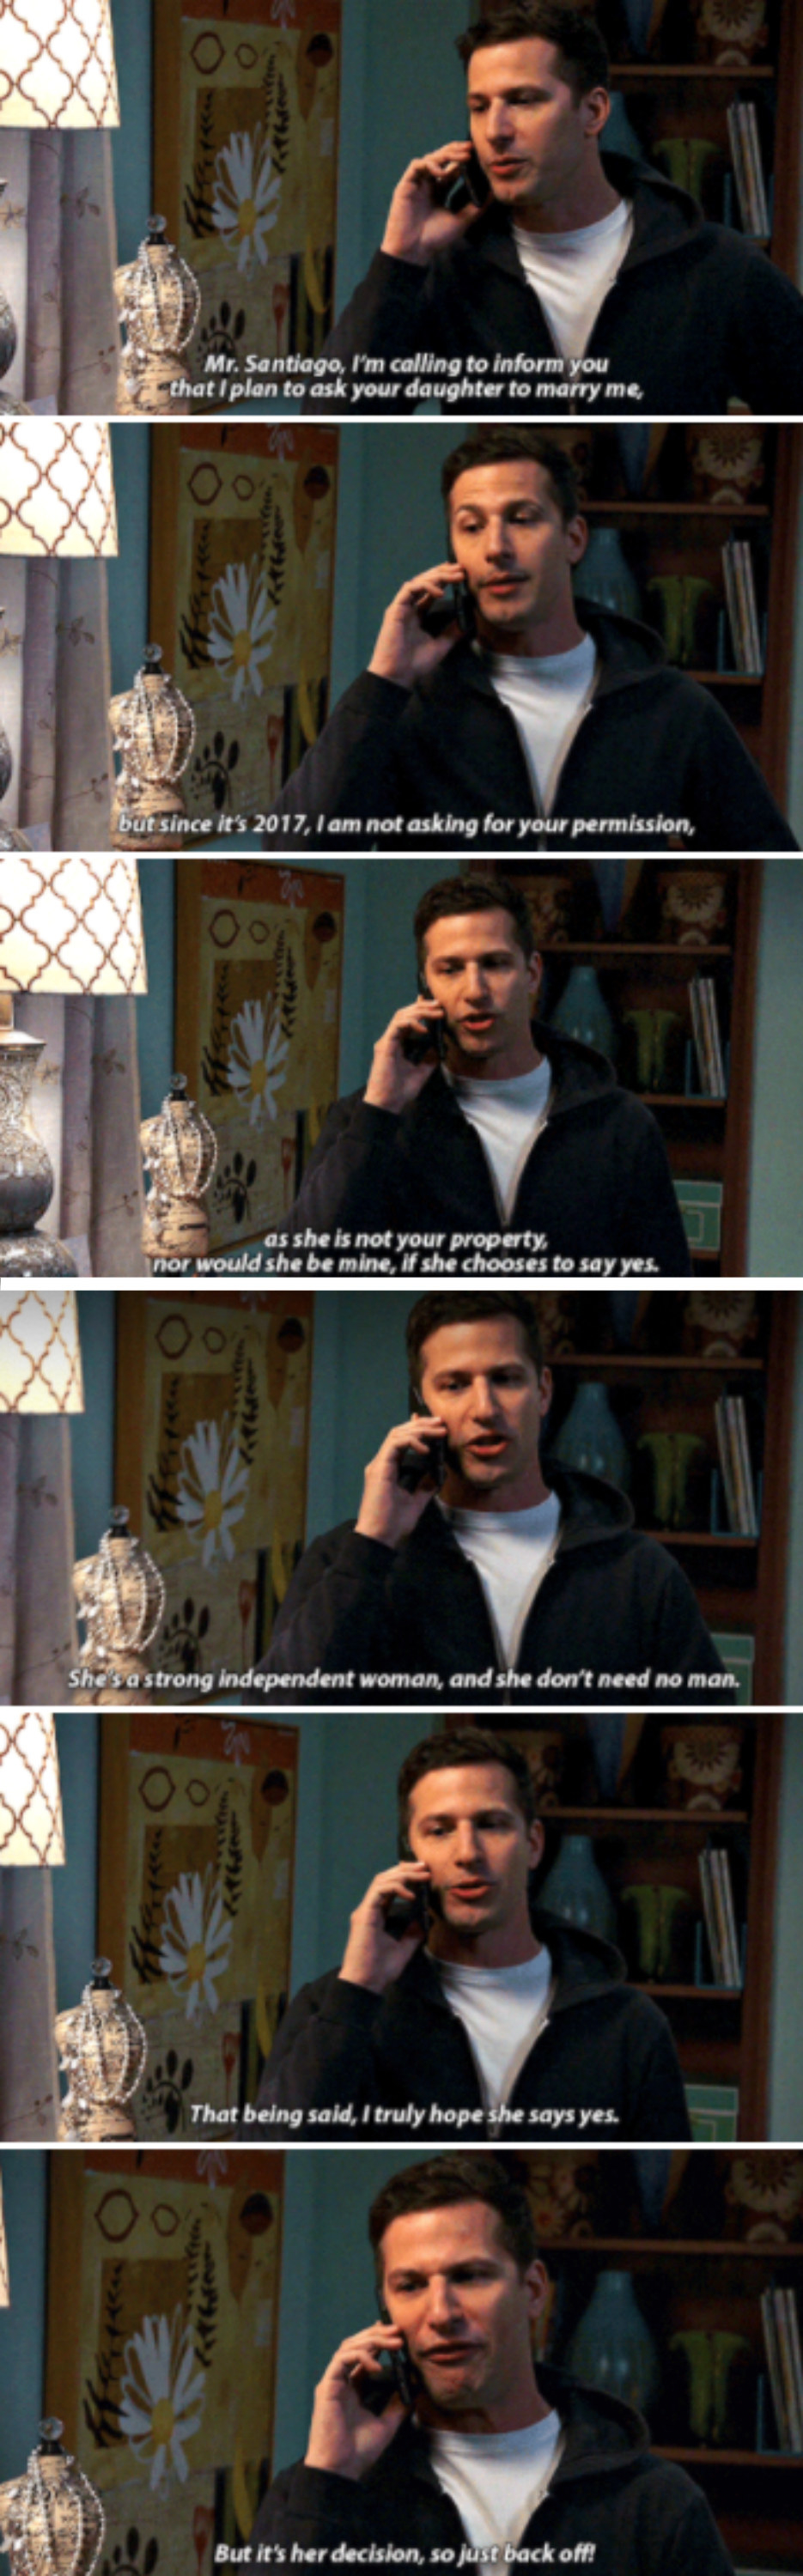 Jake: &quot;Mr. Santiago, I&#x27;m calling to inform you that I plan to ask your daughter to marry me, but since it&#x27;s 2017, I am not asking for your permission, as she is not your property, nor would she be mind, if she chooses to say yes&quot;